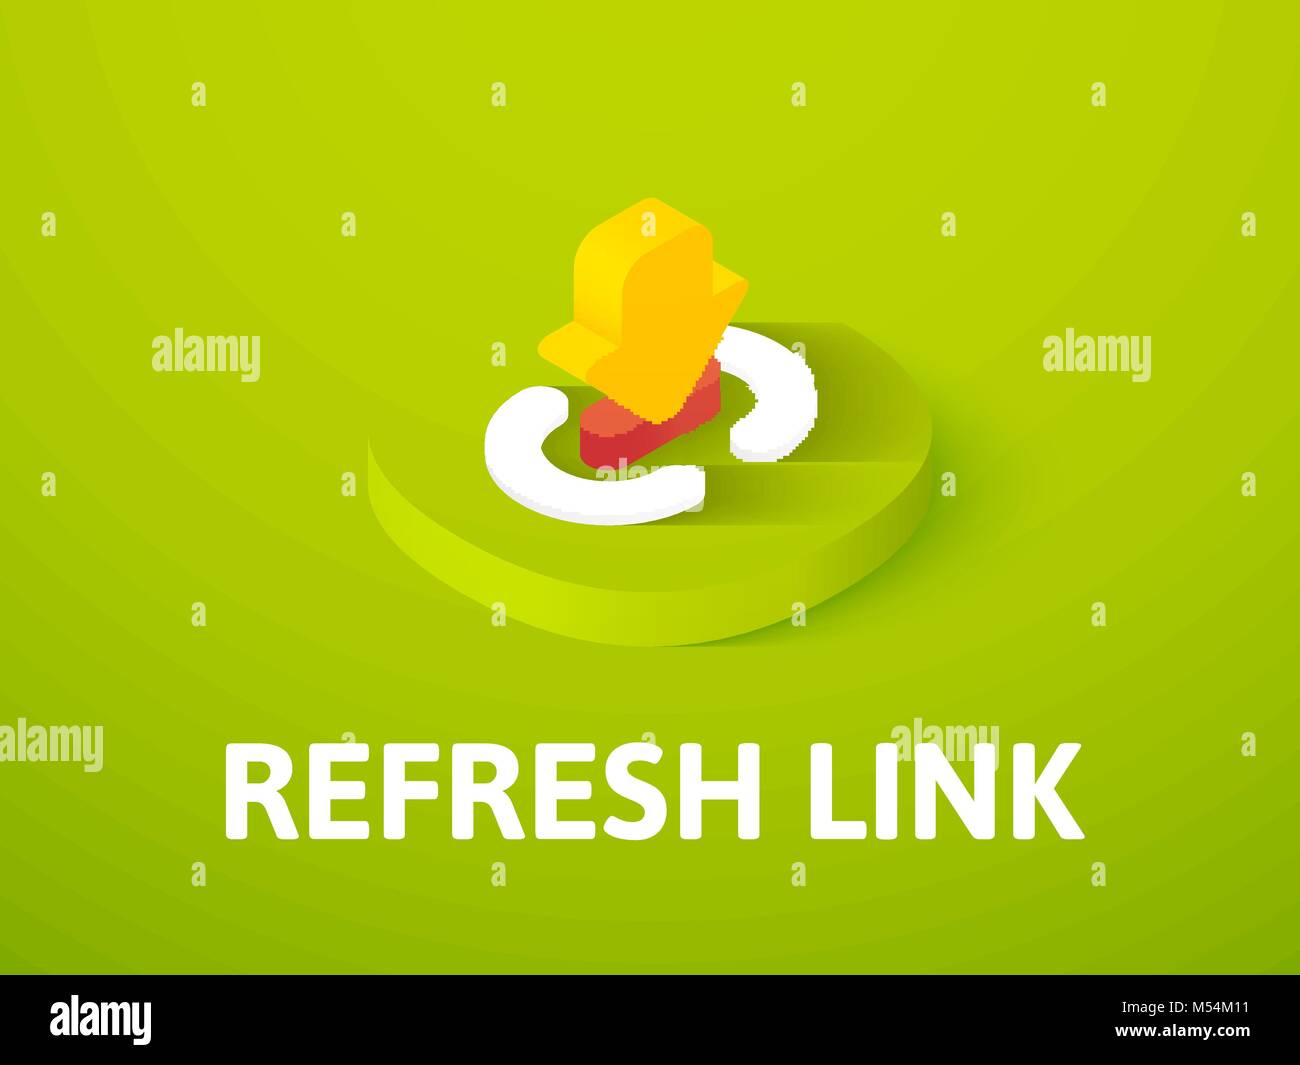 Refresh link isometric icon, isolated on color background Stock Vector